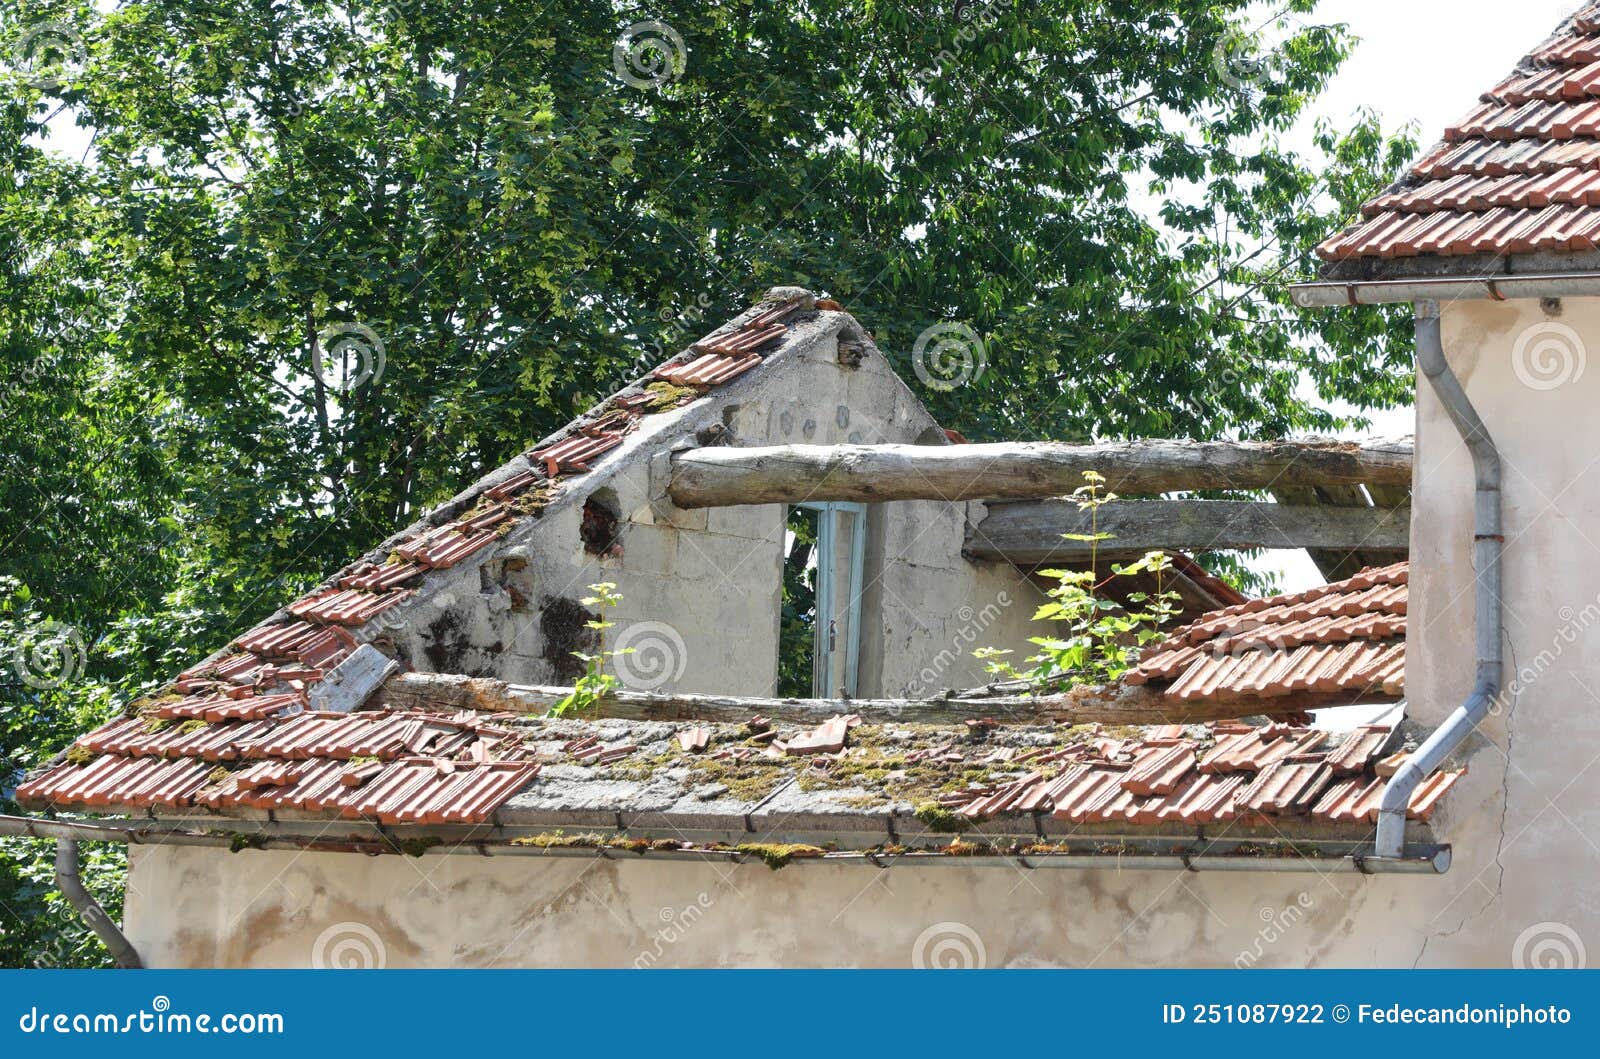 roof of the old house completely collapsed due to lack of mainte